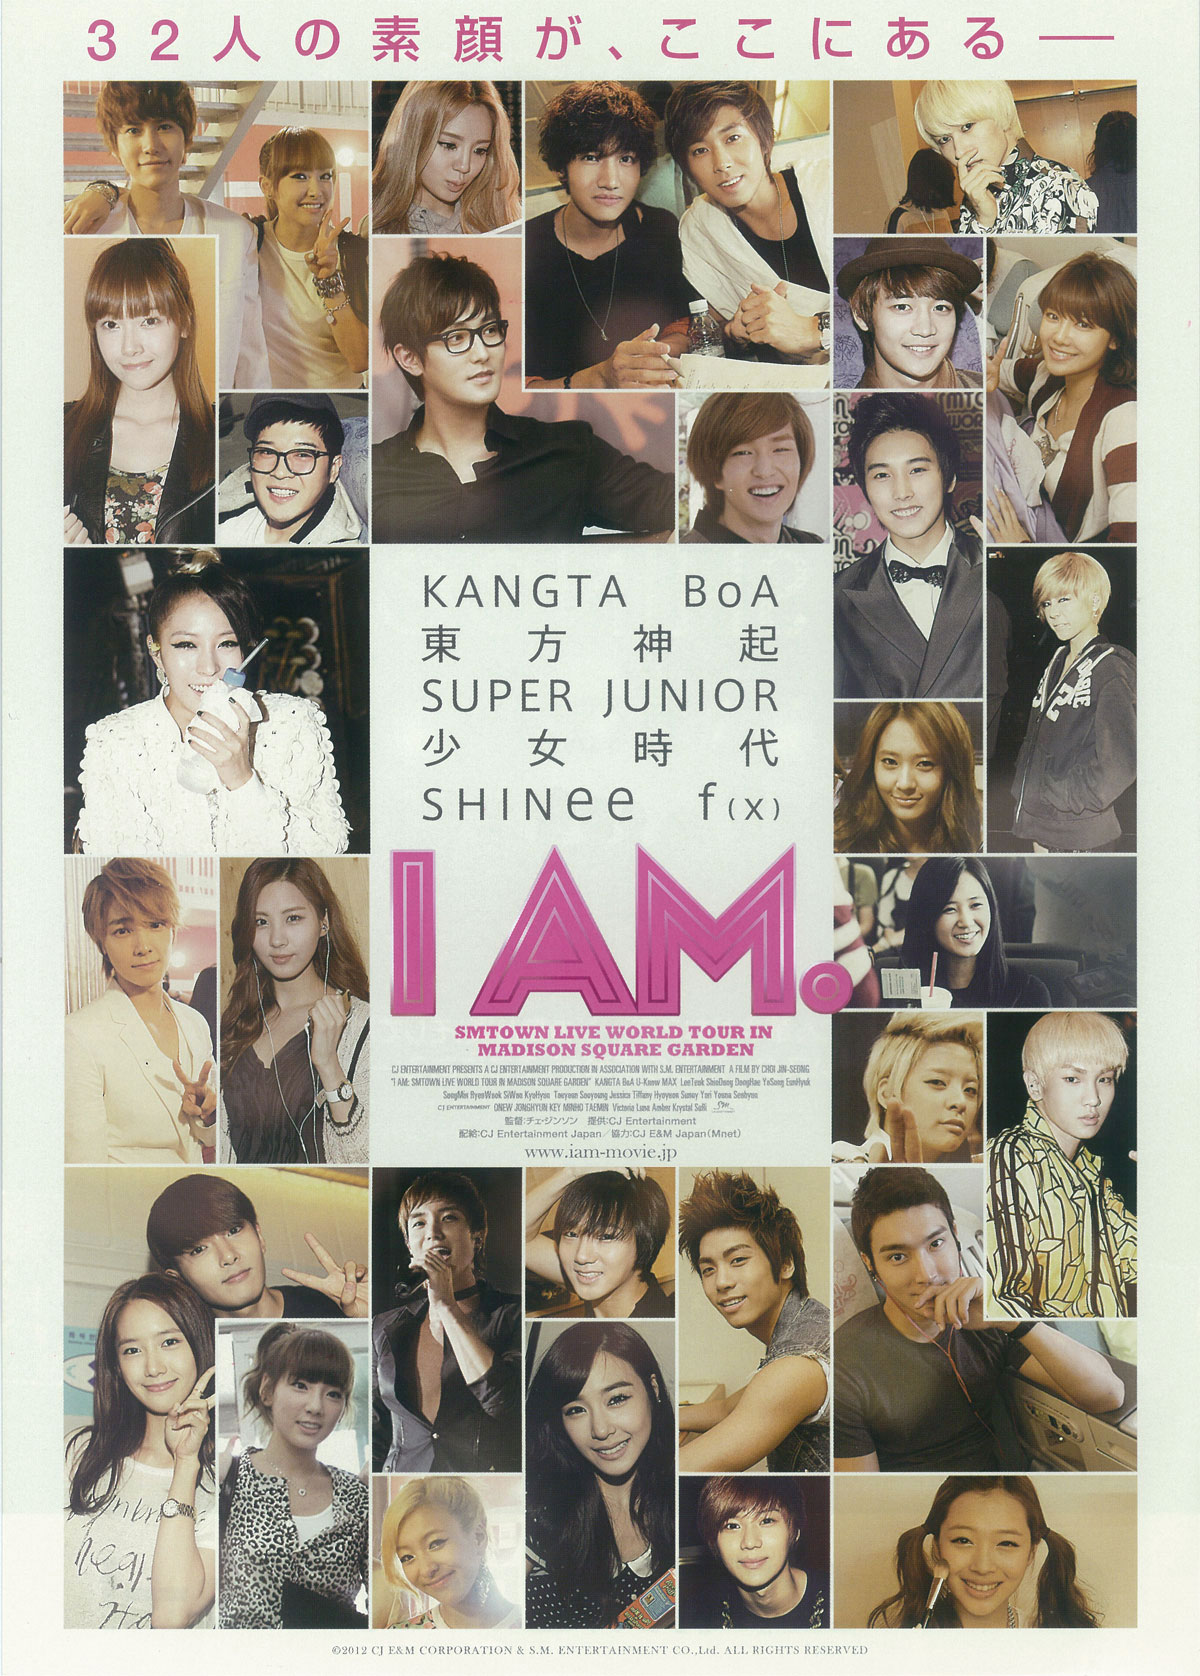 I AM. SMTOWN LIVE WORLD TOUR IN MADISON SQUARE GARDENの画像